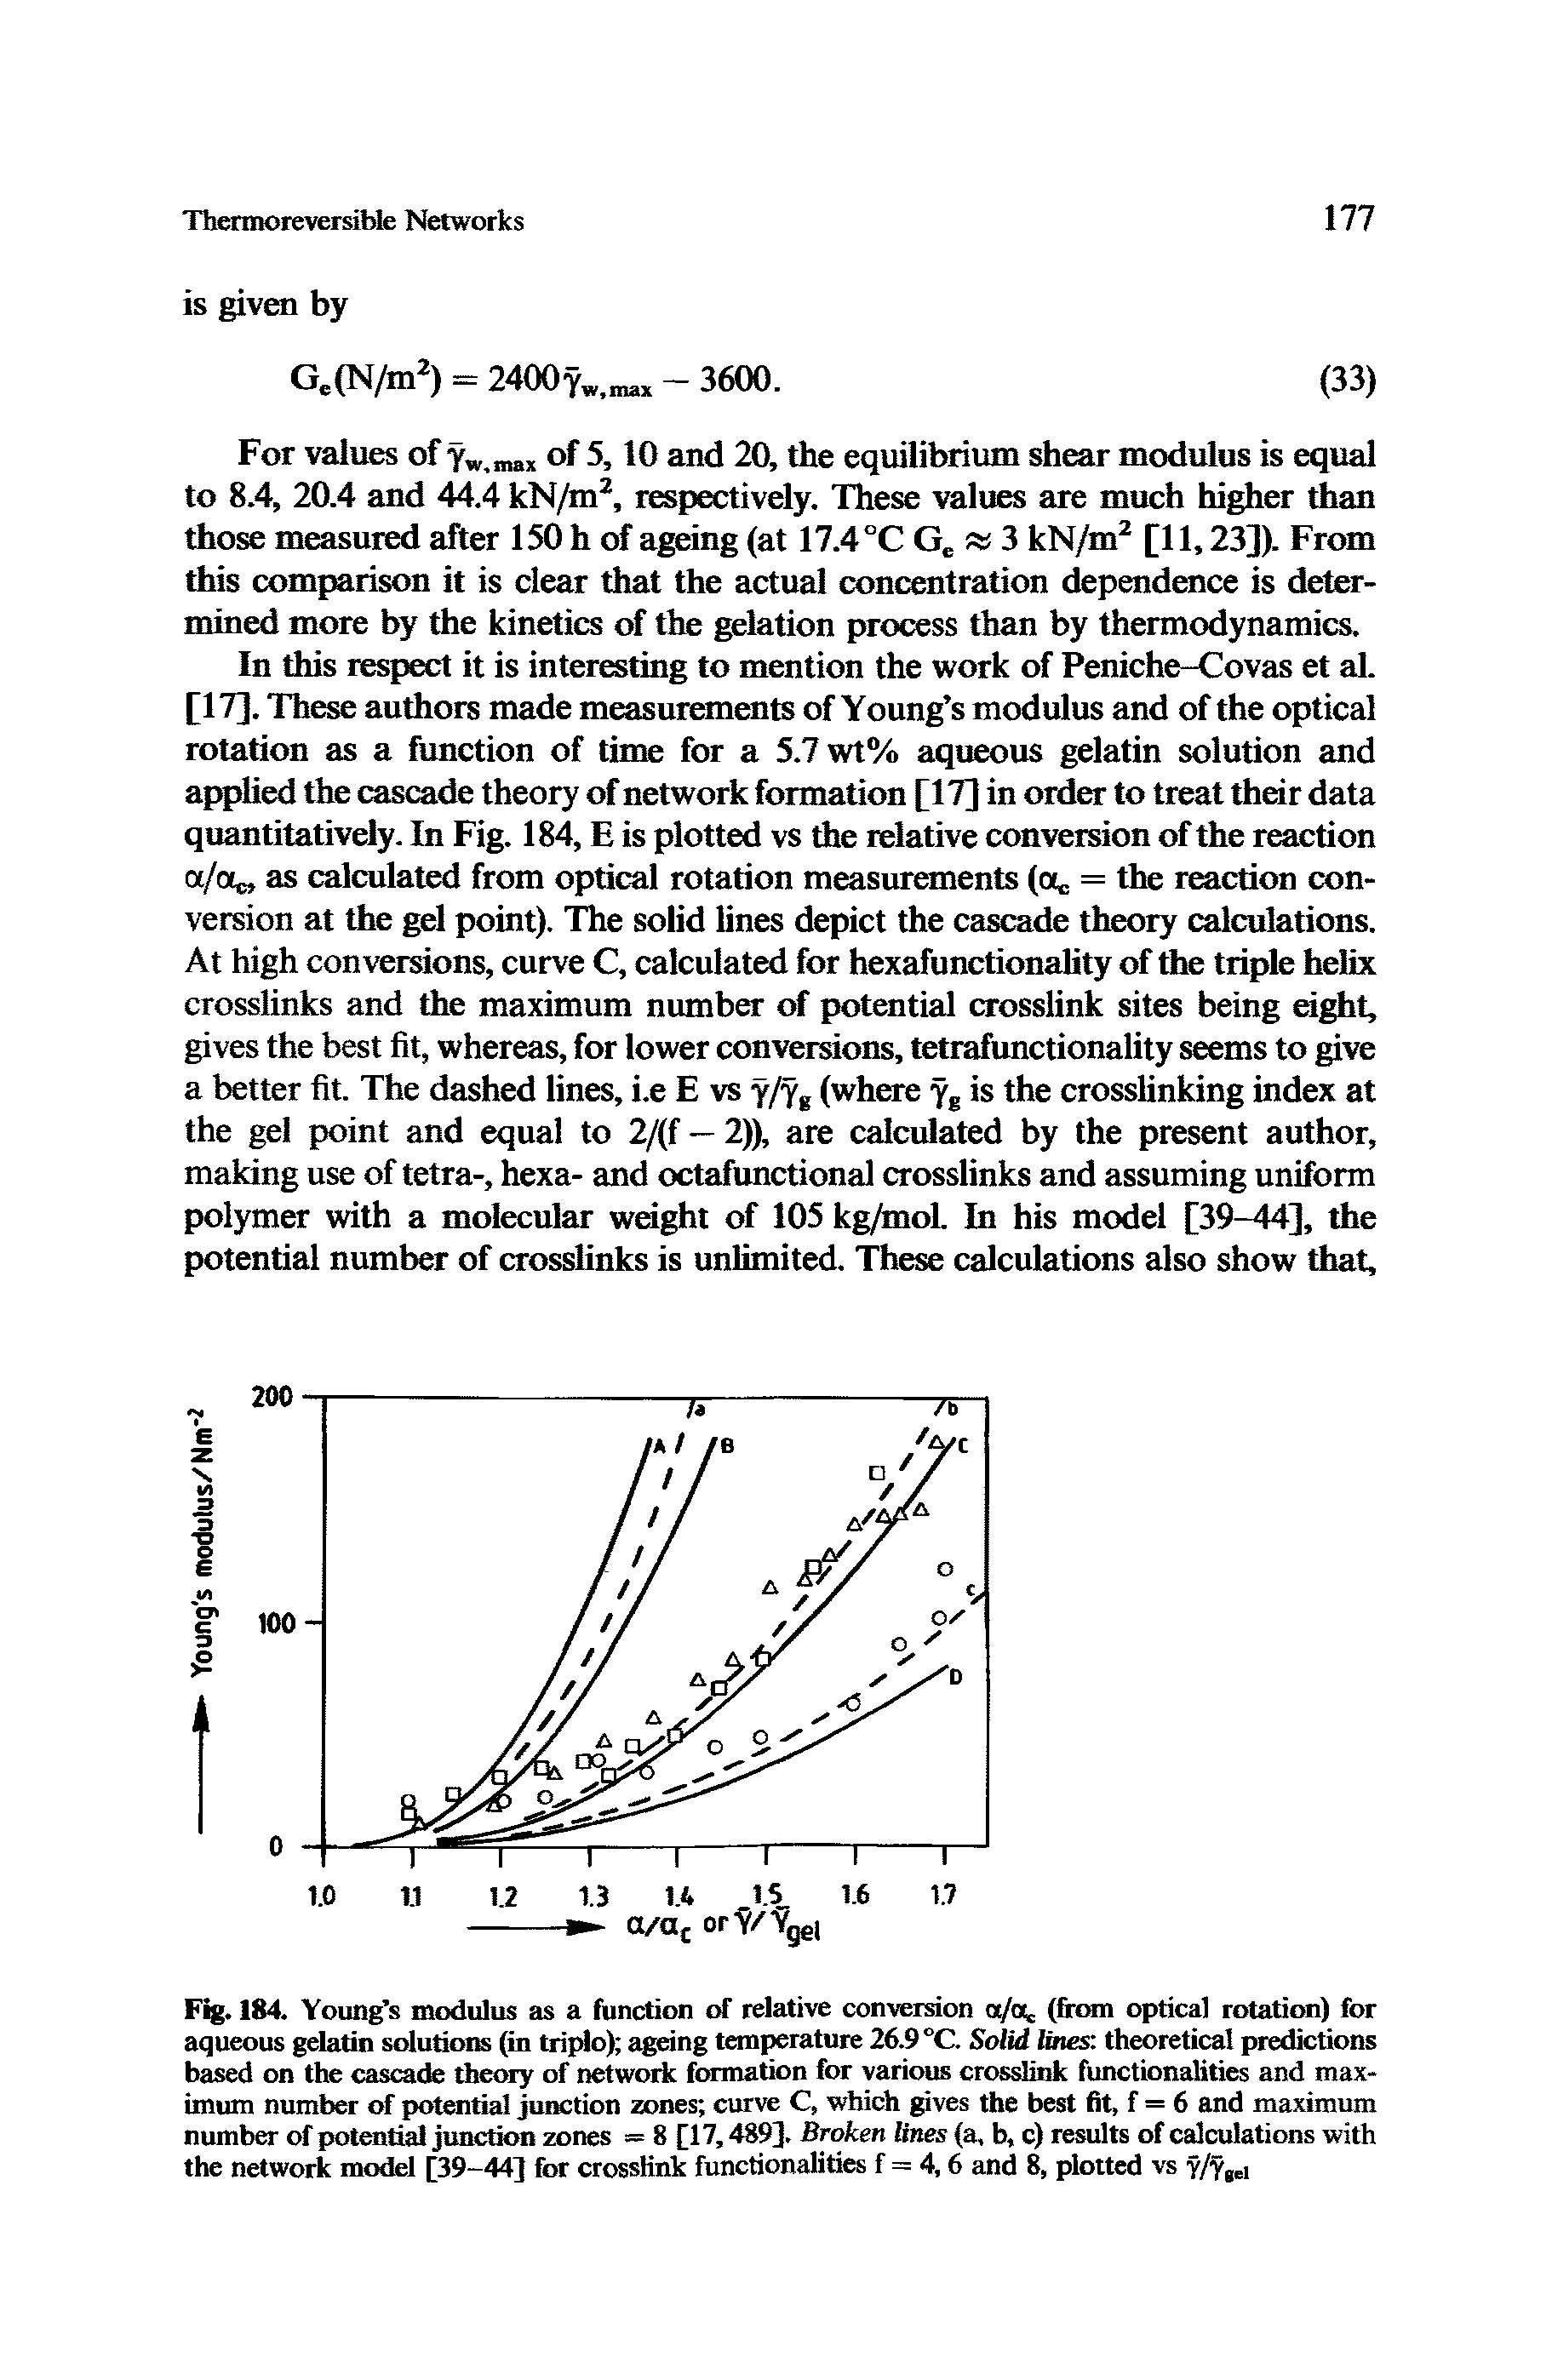 Fig. 184. Young s modulus as a function of relative conversion a/a (finrni optical rotation) for aqueous gelatin solutions (in tripio) i eing temperature 26.9 °C. Solid lines theoretical predictions based on the cascade theory of network formation for various crosslink functionalities and maximum number of potoitial junction zones curve C, which gives the best fit, f = 6 and maximum number potential juiK tion zones = 8 [17,489j. Broken lines (a, b, c) results of calculaticms with the network model [39-44] for crosslink functionalities f = 4,6 and 8, plotted vs y/f i...